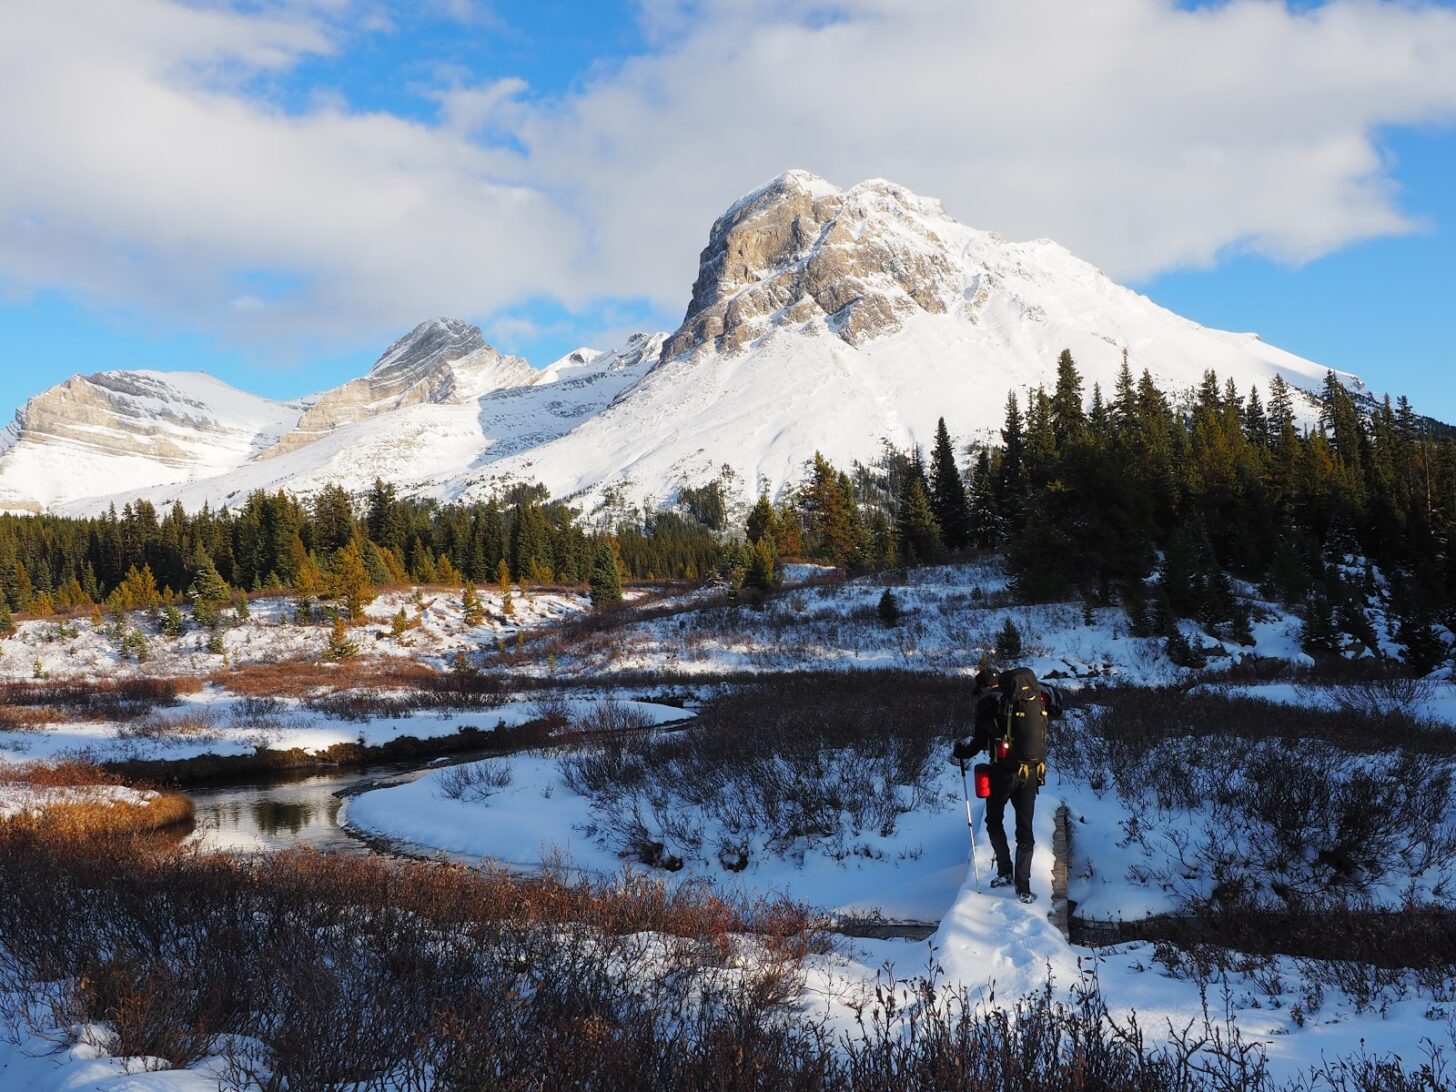 A woman crosses a snowy creek with a mountain in the background.